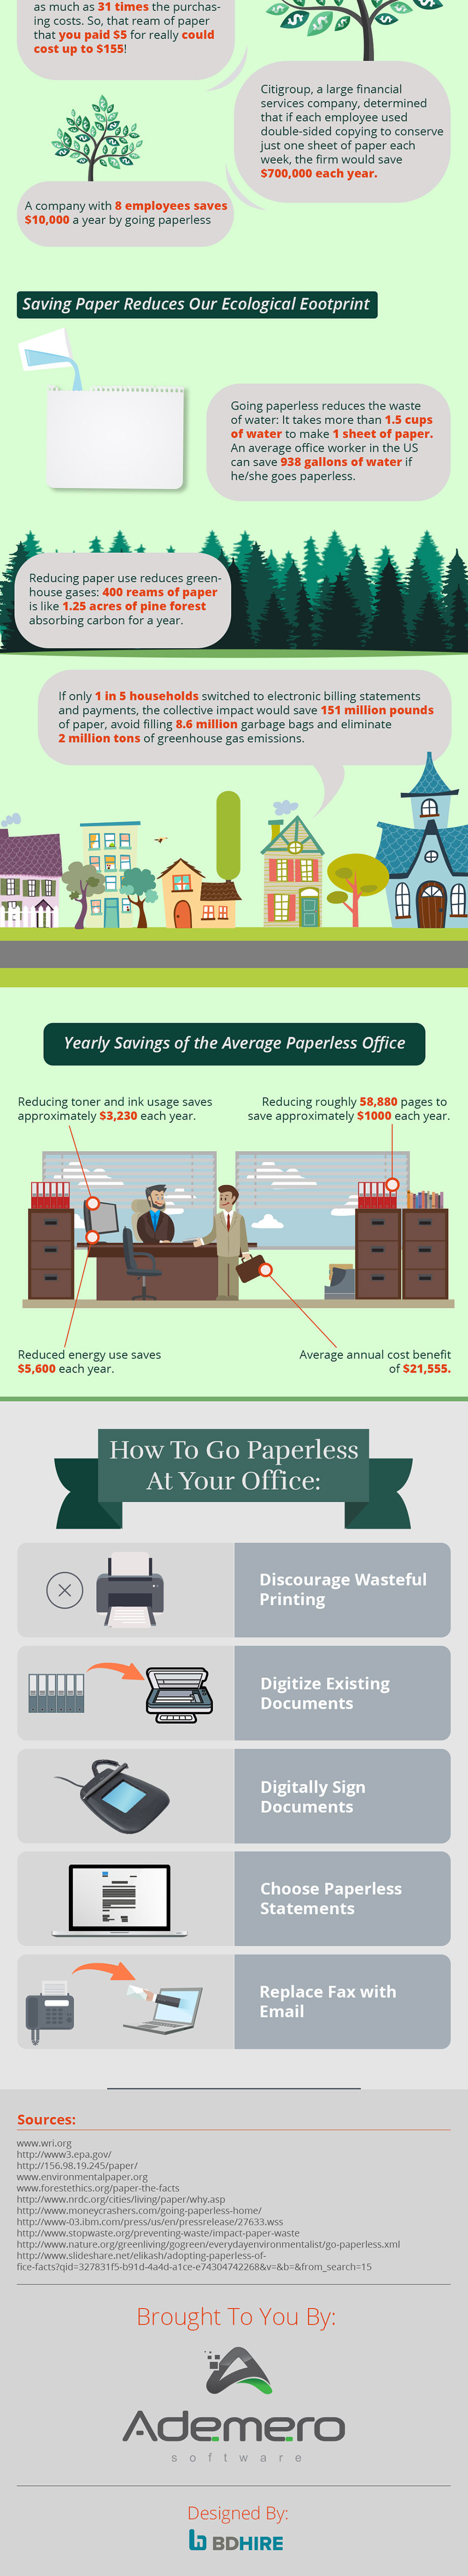 Here’s Why Going Paperless is a Must for your Business (Infographic) - Part 2